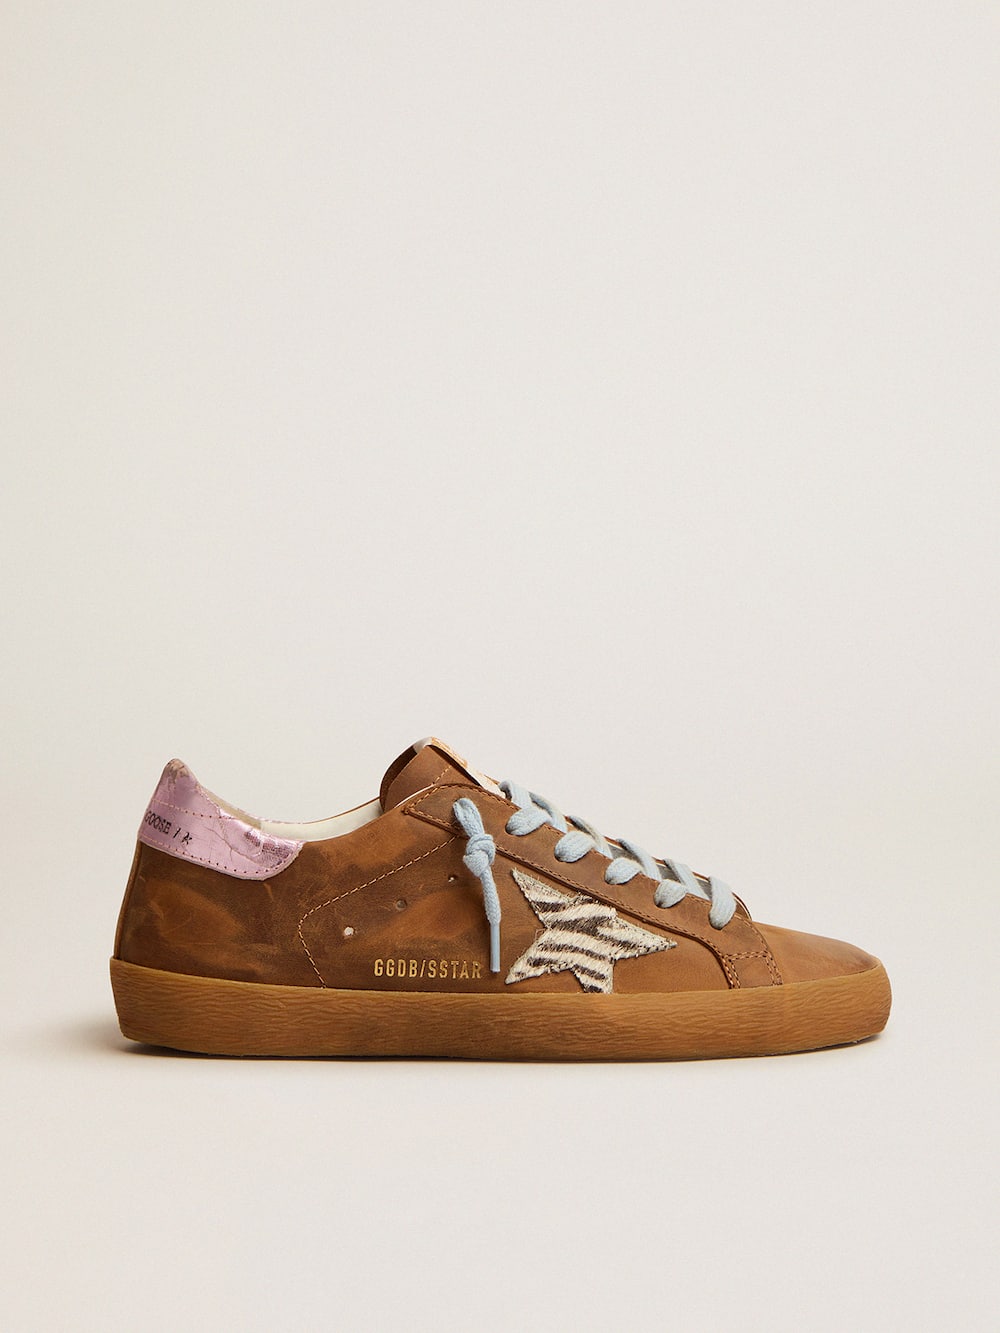 Golden Goose - Super-Star sneakers in brown waxed suede with a zebra-print pony skin star in 